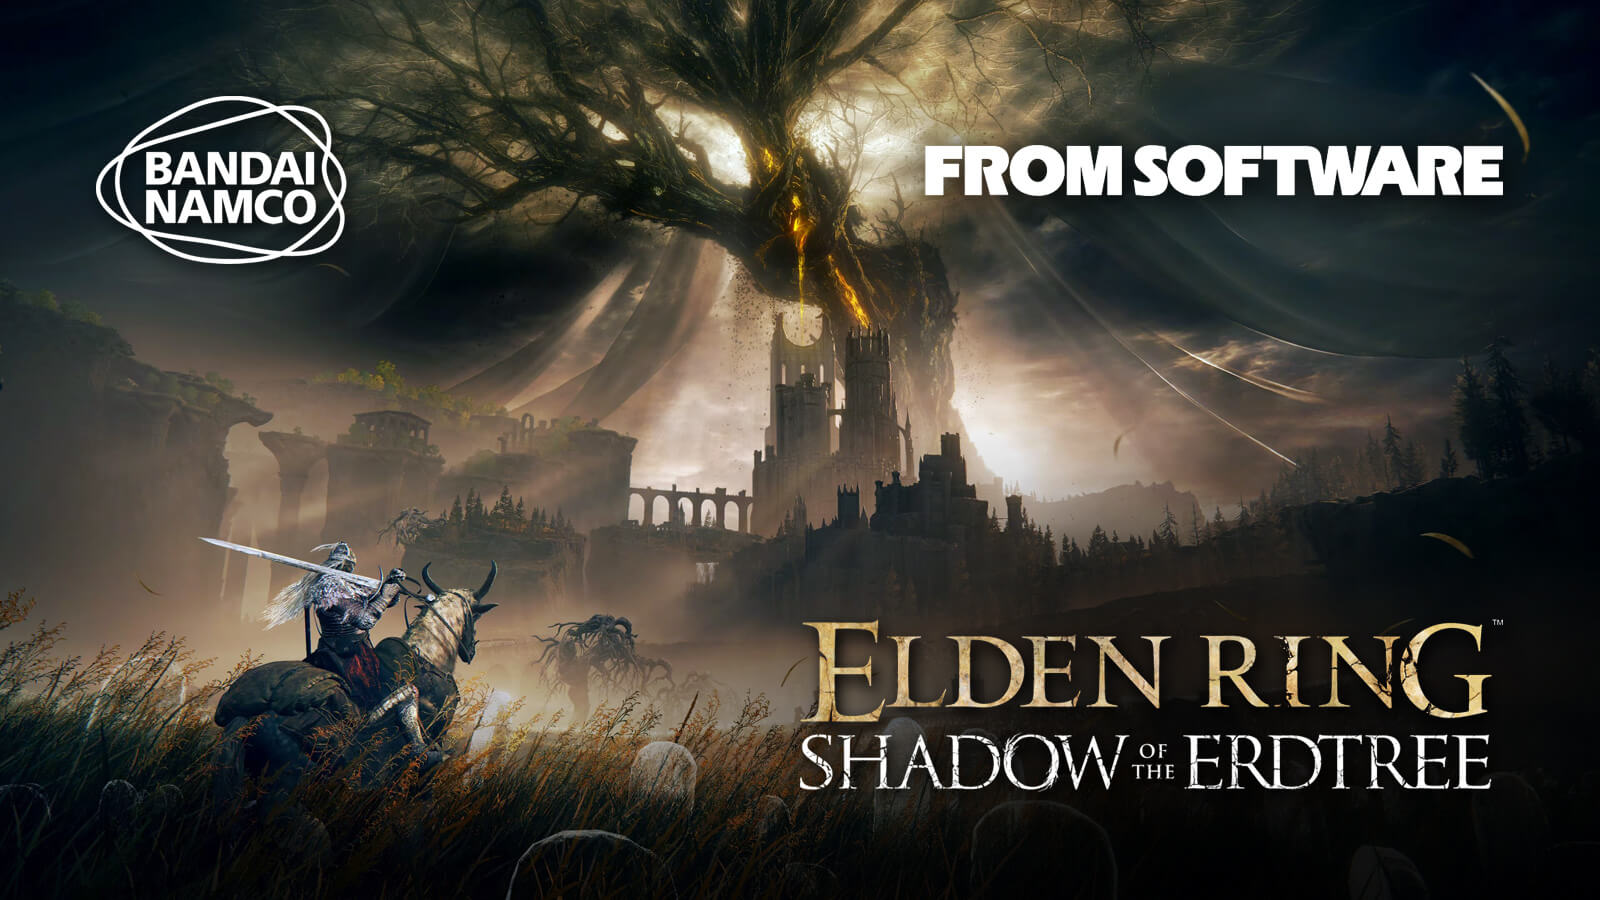 Elden Ring: Shadow Of The Erdtree: Your Pre-Order Guide in the UAE
